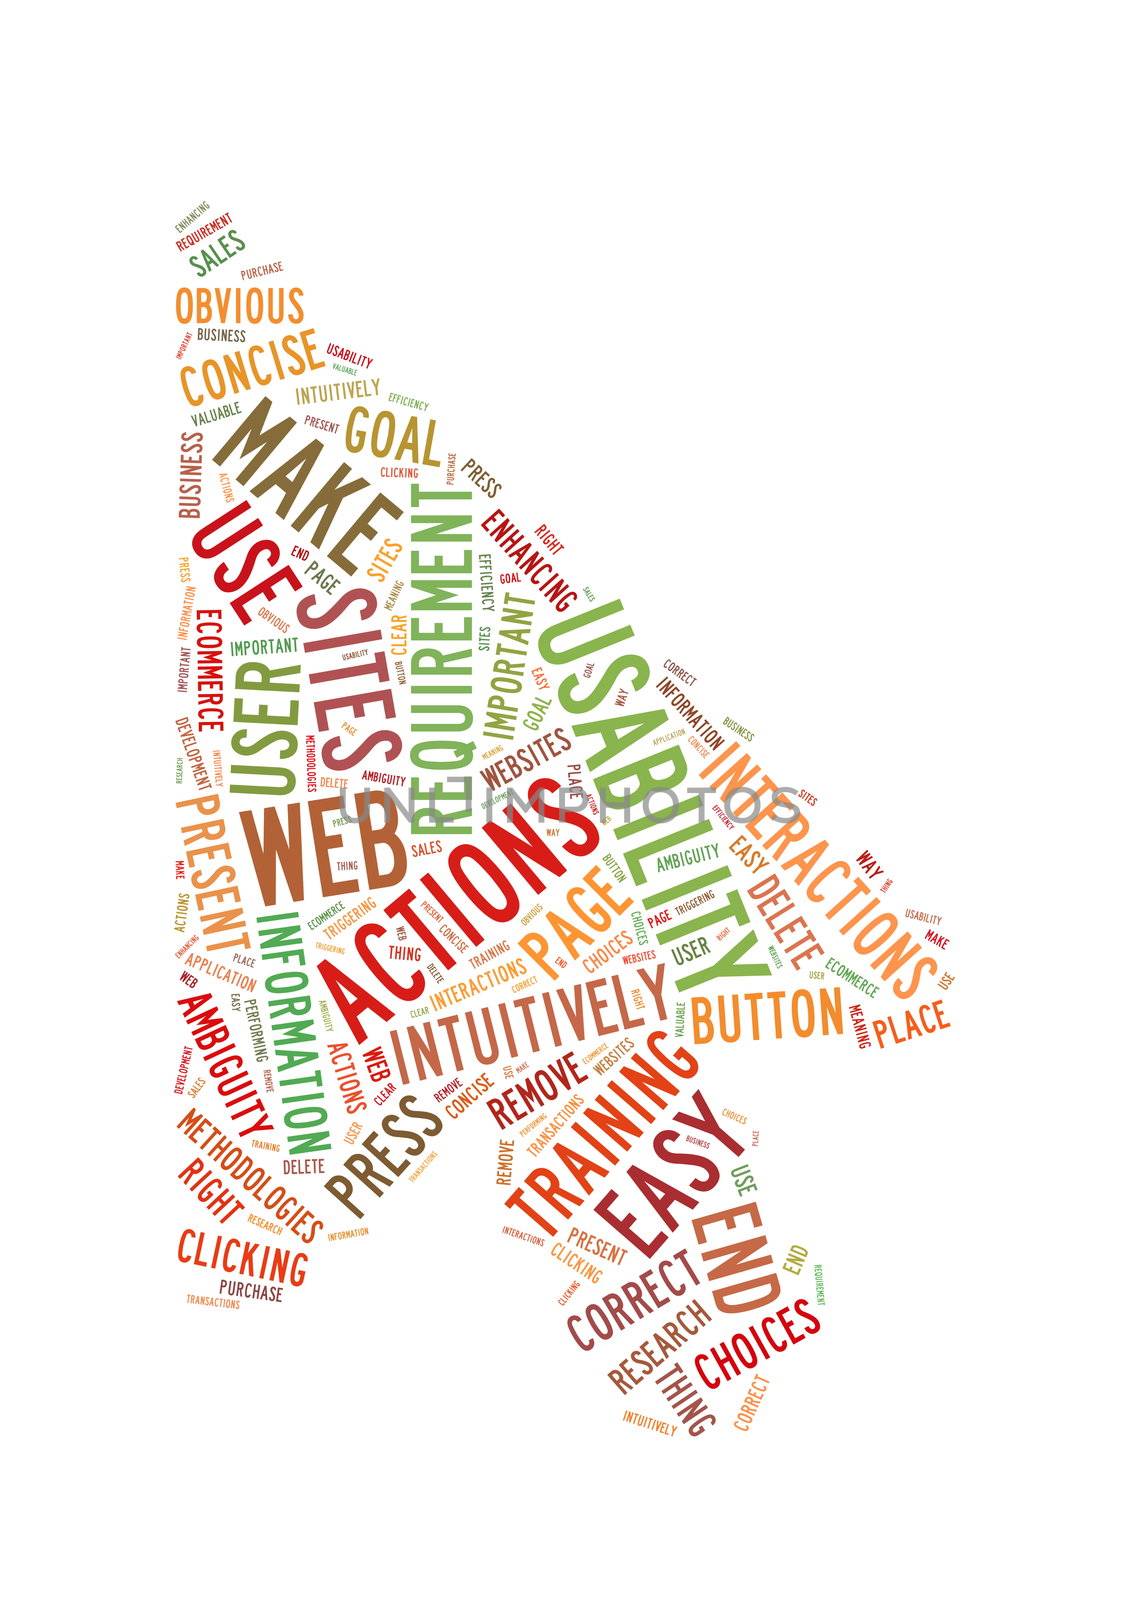 Word Cloud Illustration of Web Usability on white